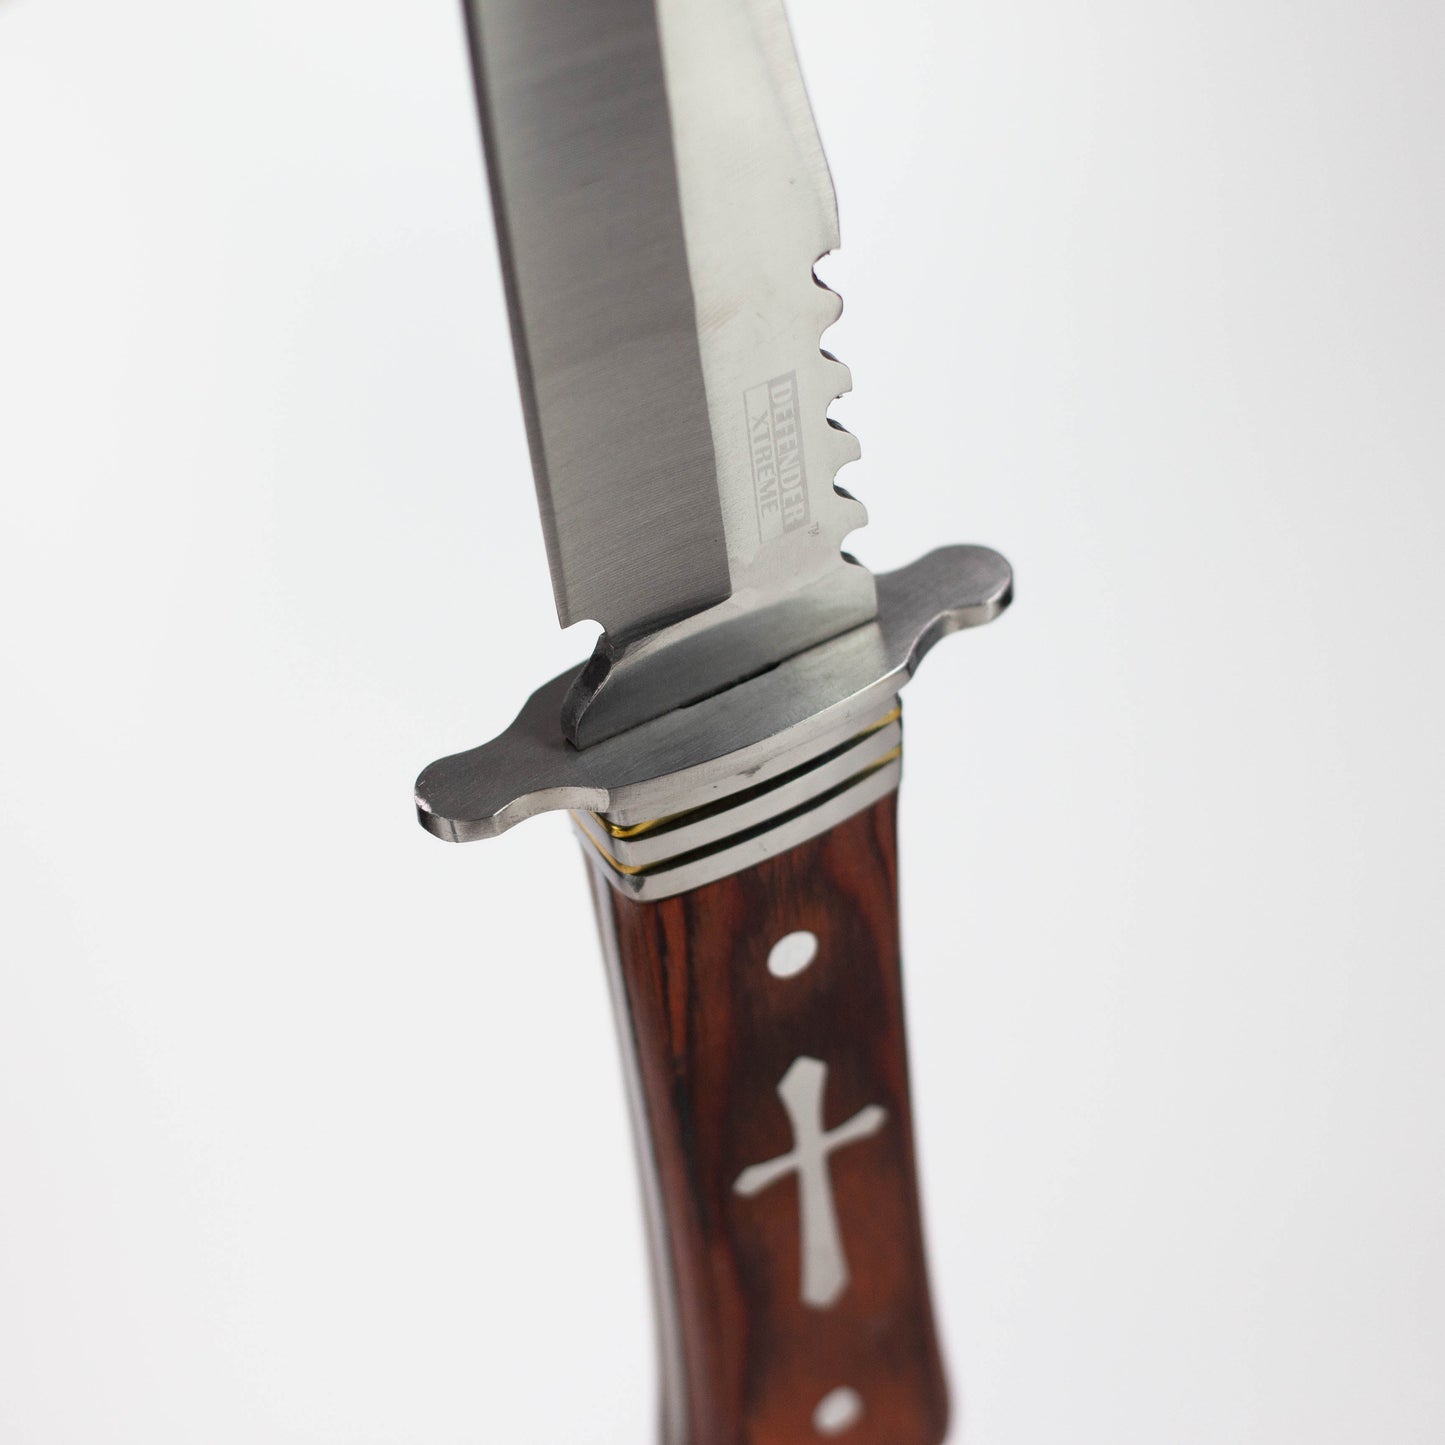 Defender-Xtream | 11" Hunting Knife Full Tang Stainless Steel Blade with Wood Handle [8155]_5